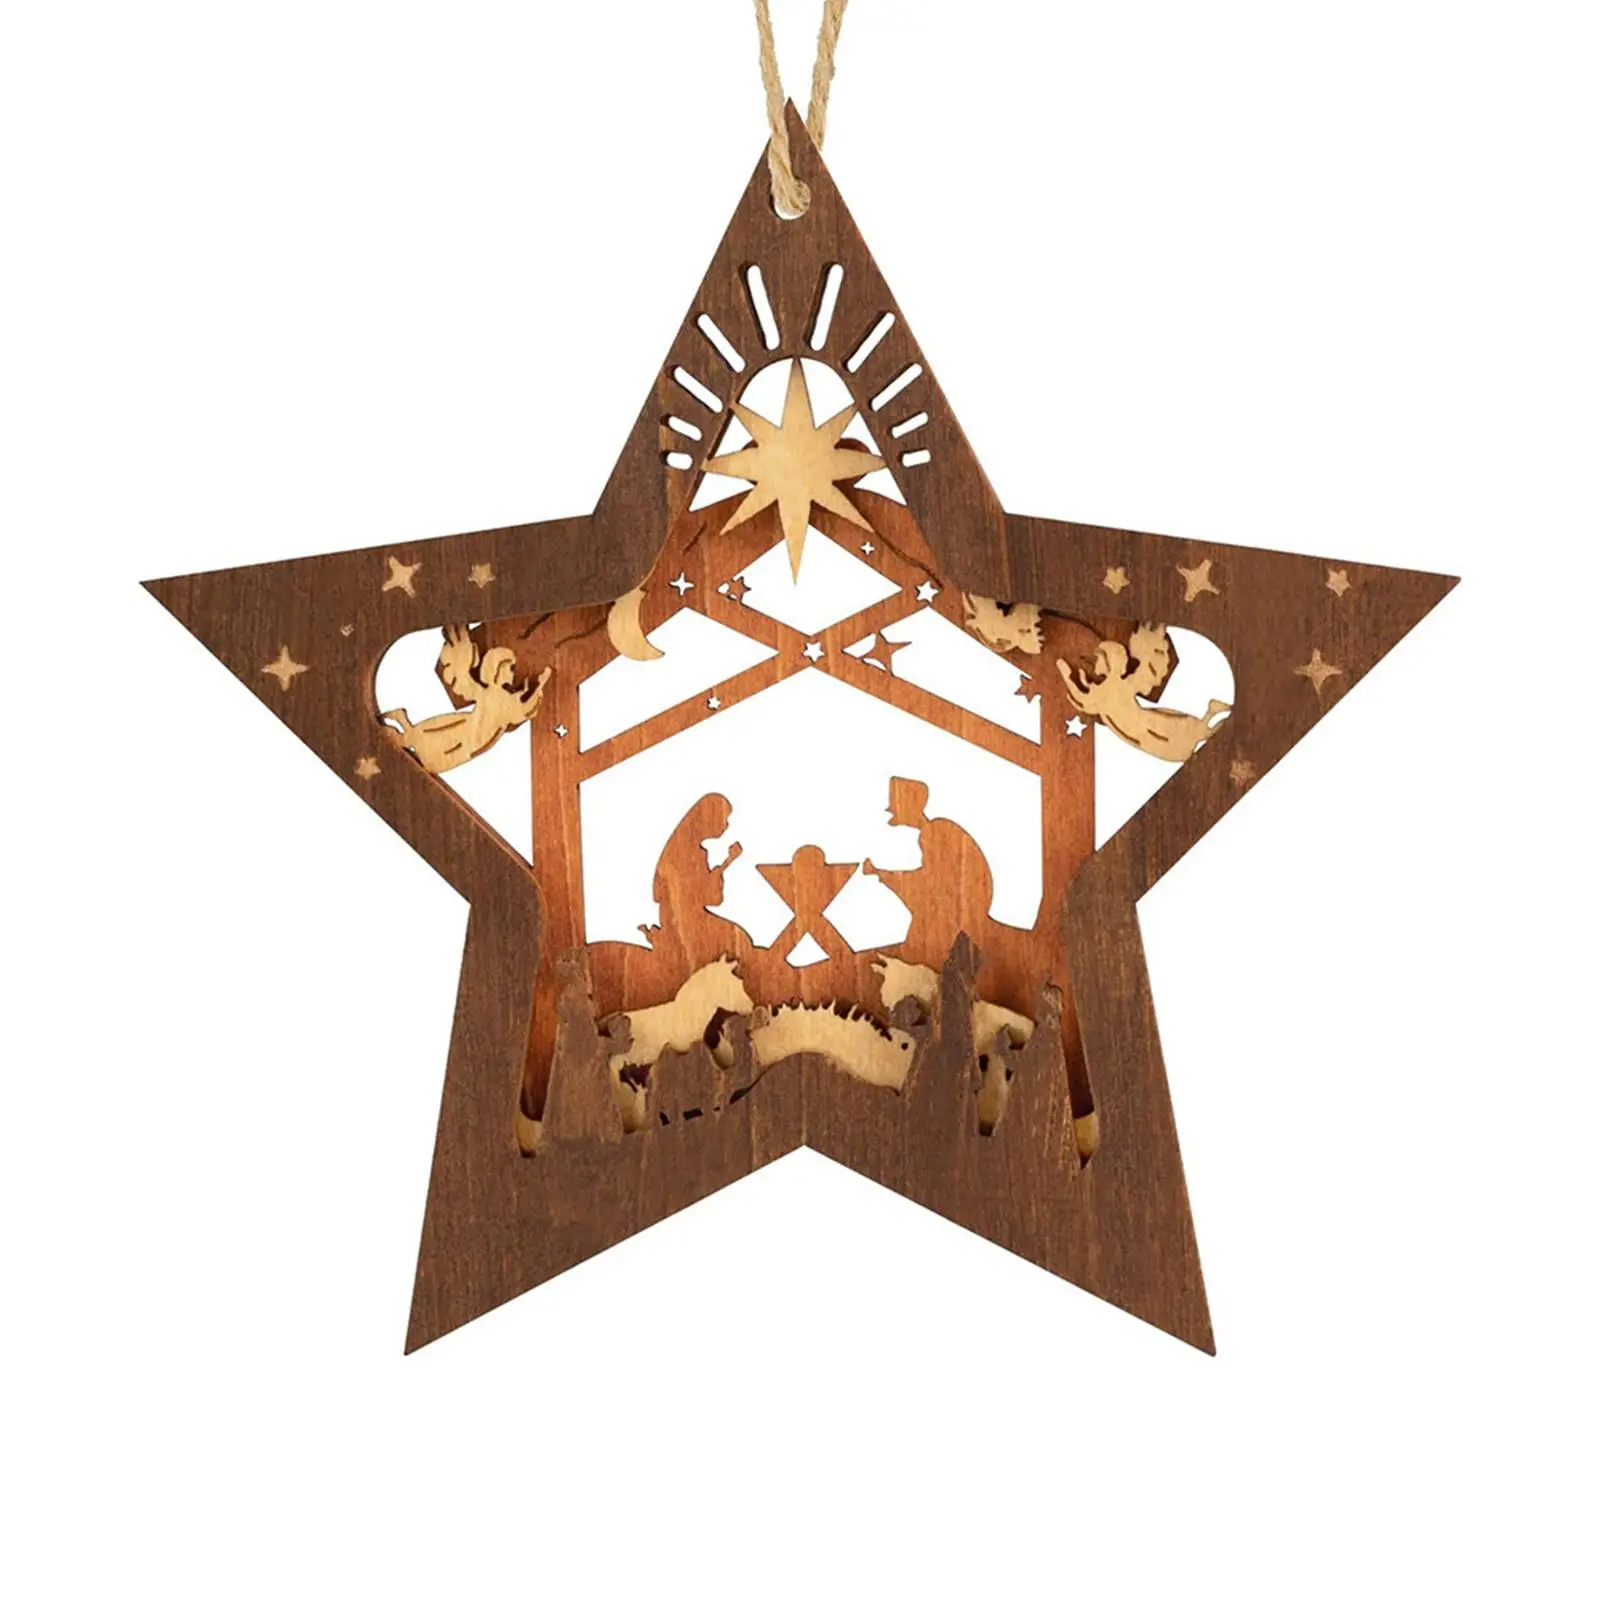 Christmas Nativity Scene Ornaments Xmas Decor Rustic Jesus Christmas Ornaments for Tables Shelves Family Indoor Fireplace